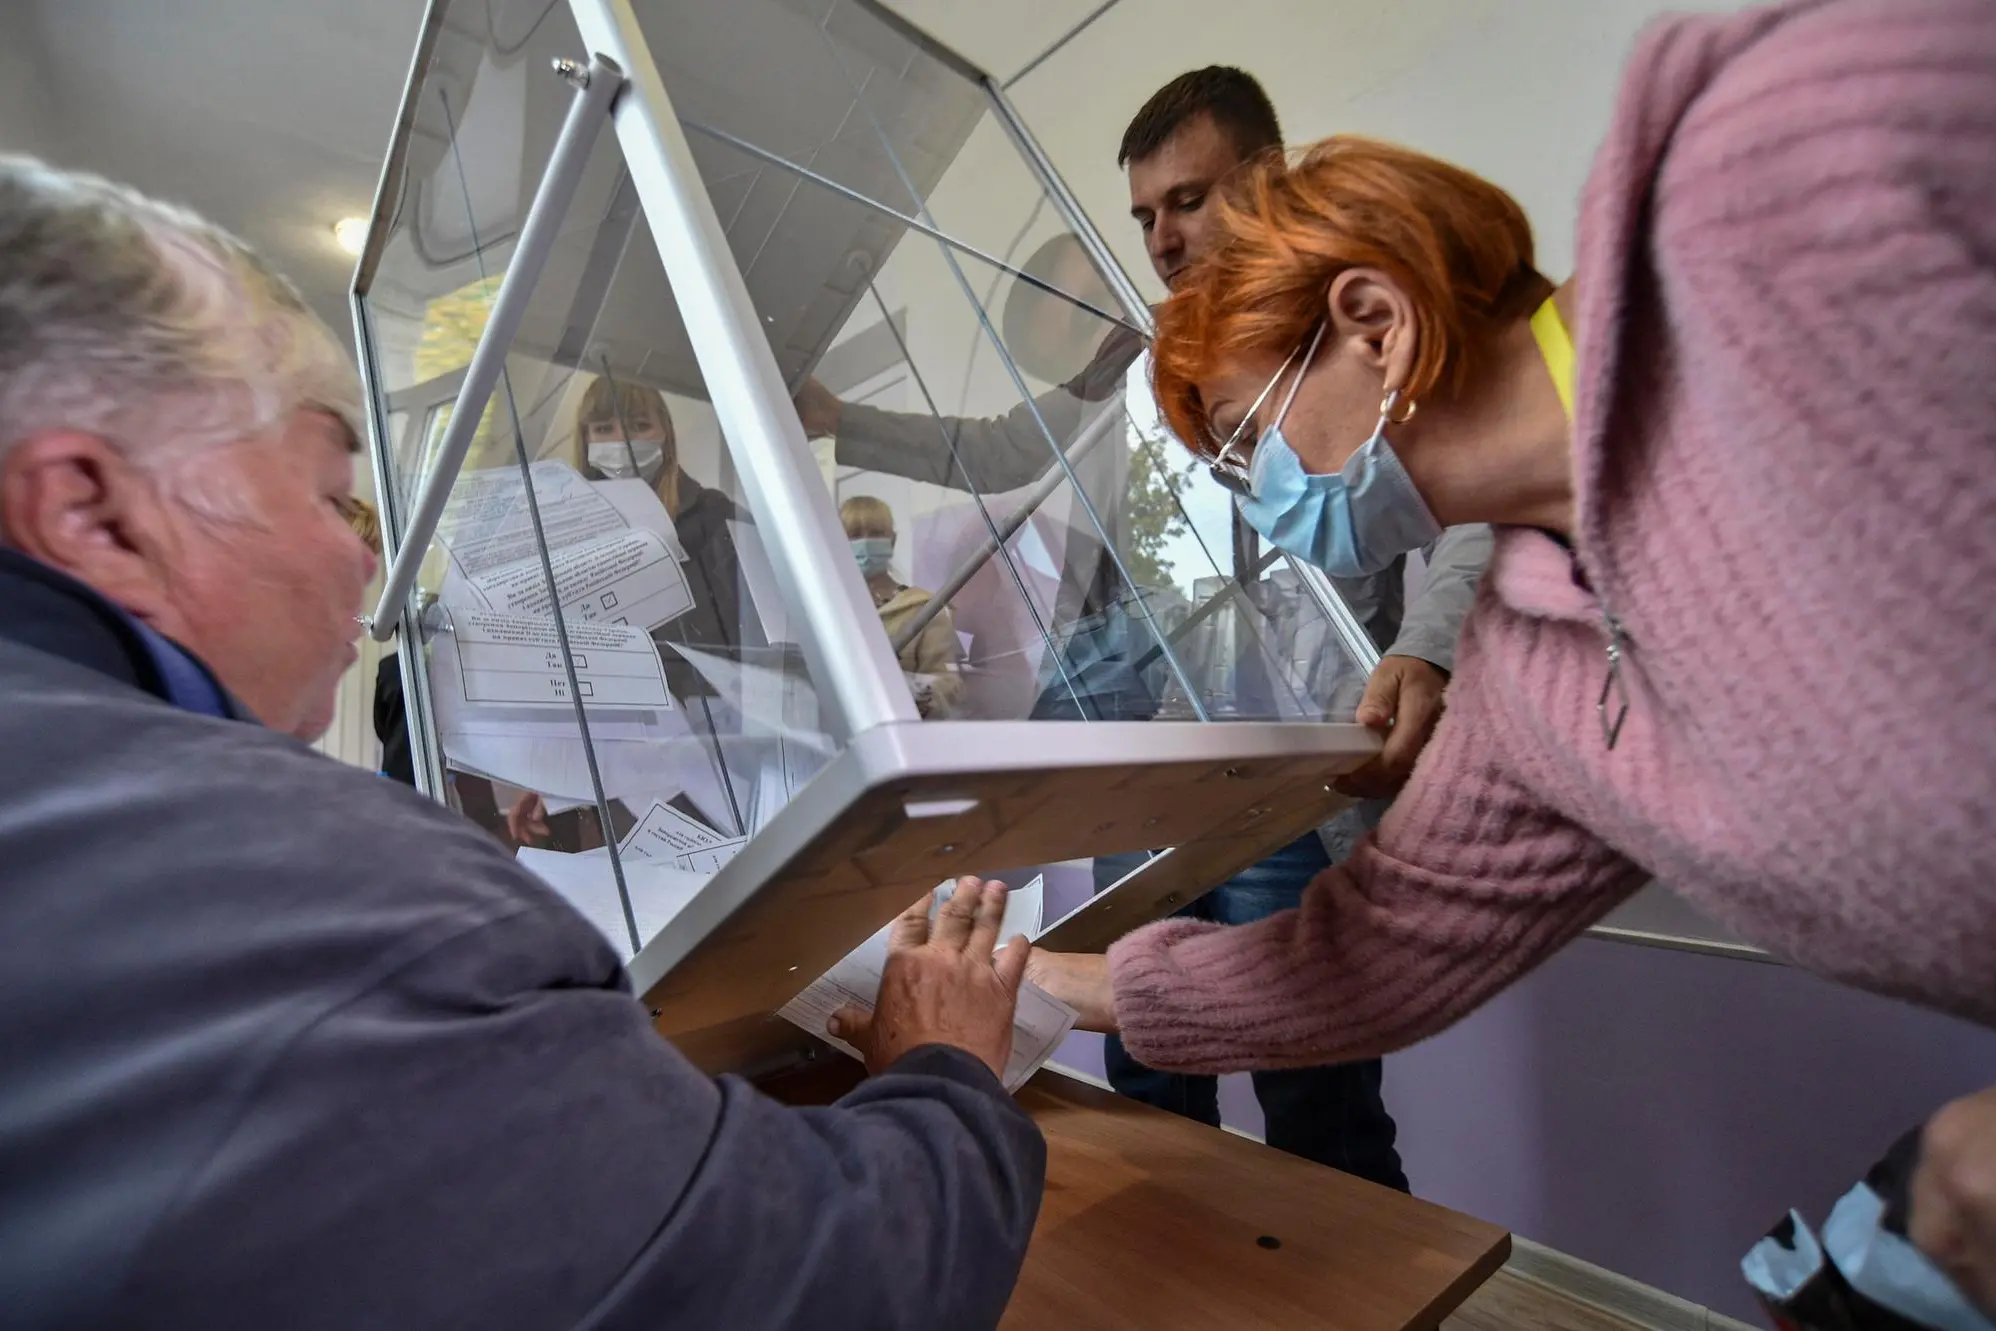 epa10209602 Local election commission members pull out ballots for vote counting in a so-called 'referendum' on the joining of Russian-controlled regions of Ukraine to Russia, at a polling station in Melitopol, Zaporizhzhia region, southeastern Ukraine, 27 September 2022. From 23 to 27 September, residents of the self-proclaimed Luhansk and Donetsk People's Republics as well as the Russian-controlled areas of the Kherson and Zaporizhzhia regions of Ukraine voted on a so-called 'referendum' to join the Russian Federation. On 24 February 2022 Russian troops entered the Ukrainian territory in what the Russian president declared a 'Special Military Operation', starting an armed conflict that has provoked destruction and a humanitarian crisis. EPA/STRINGER